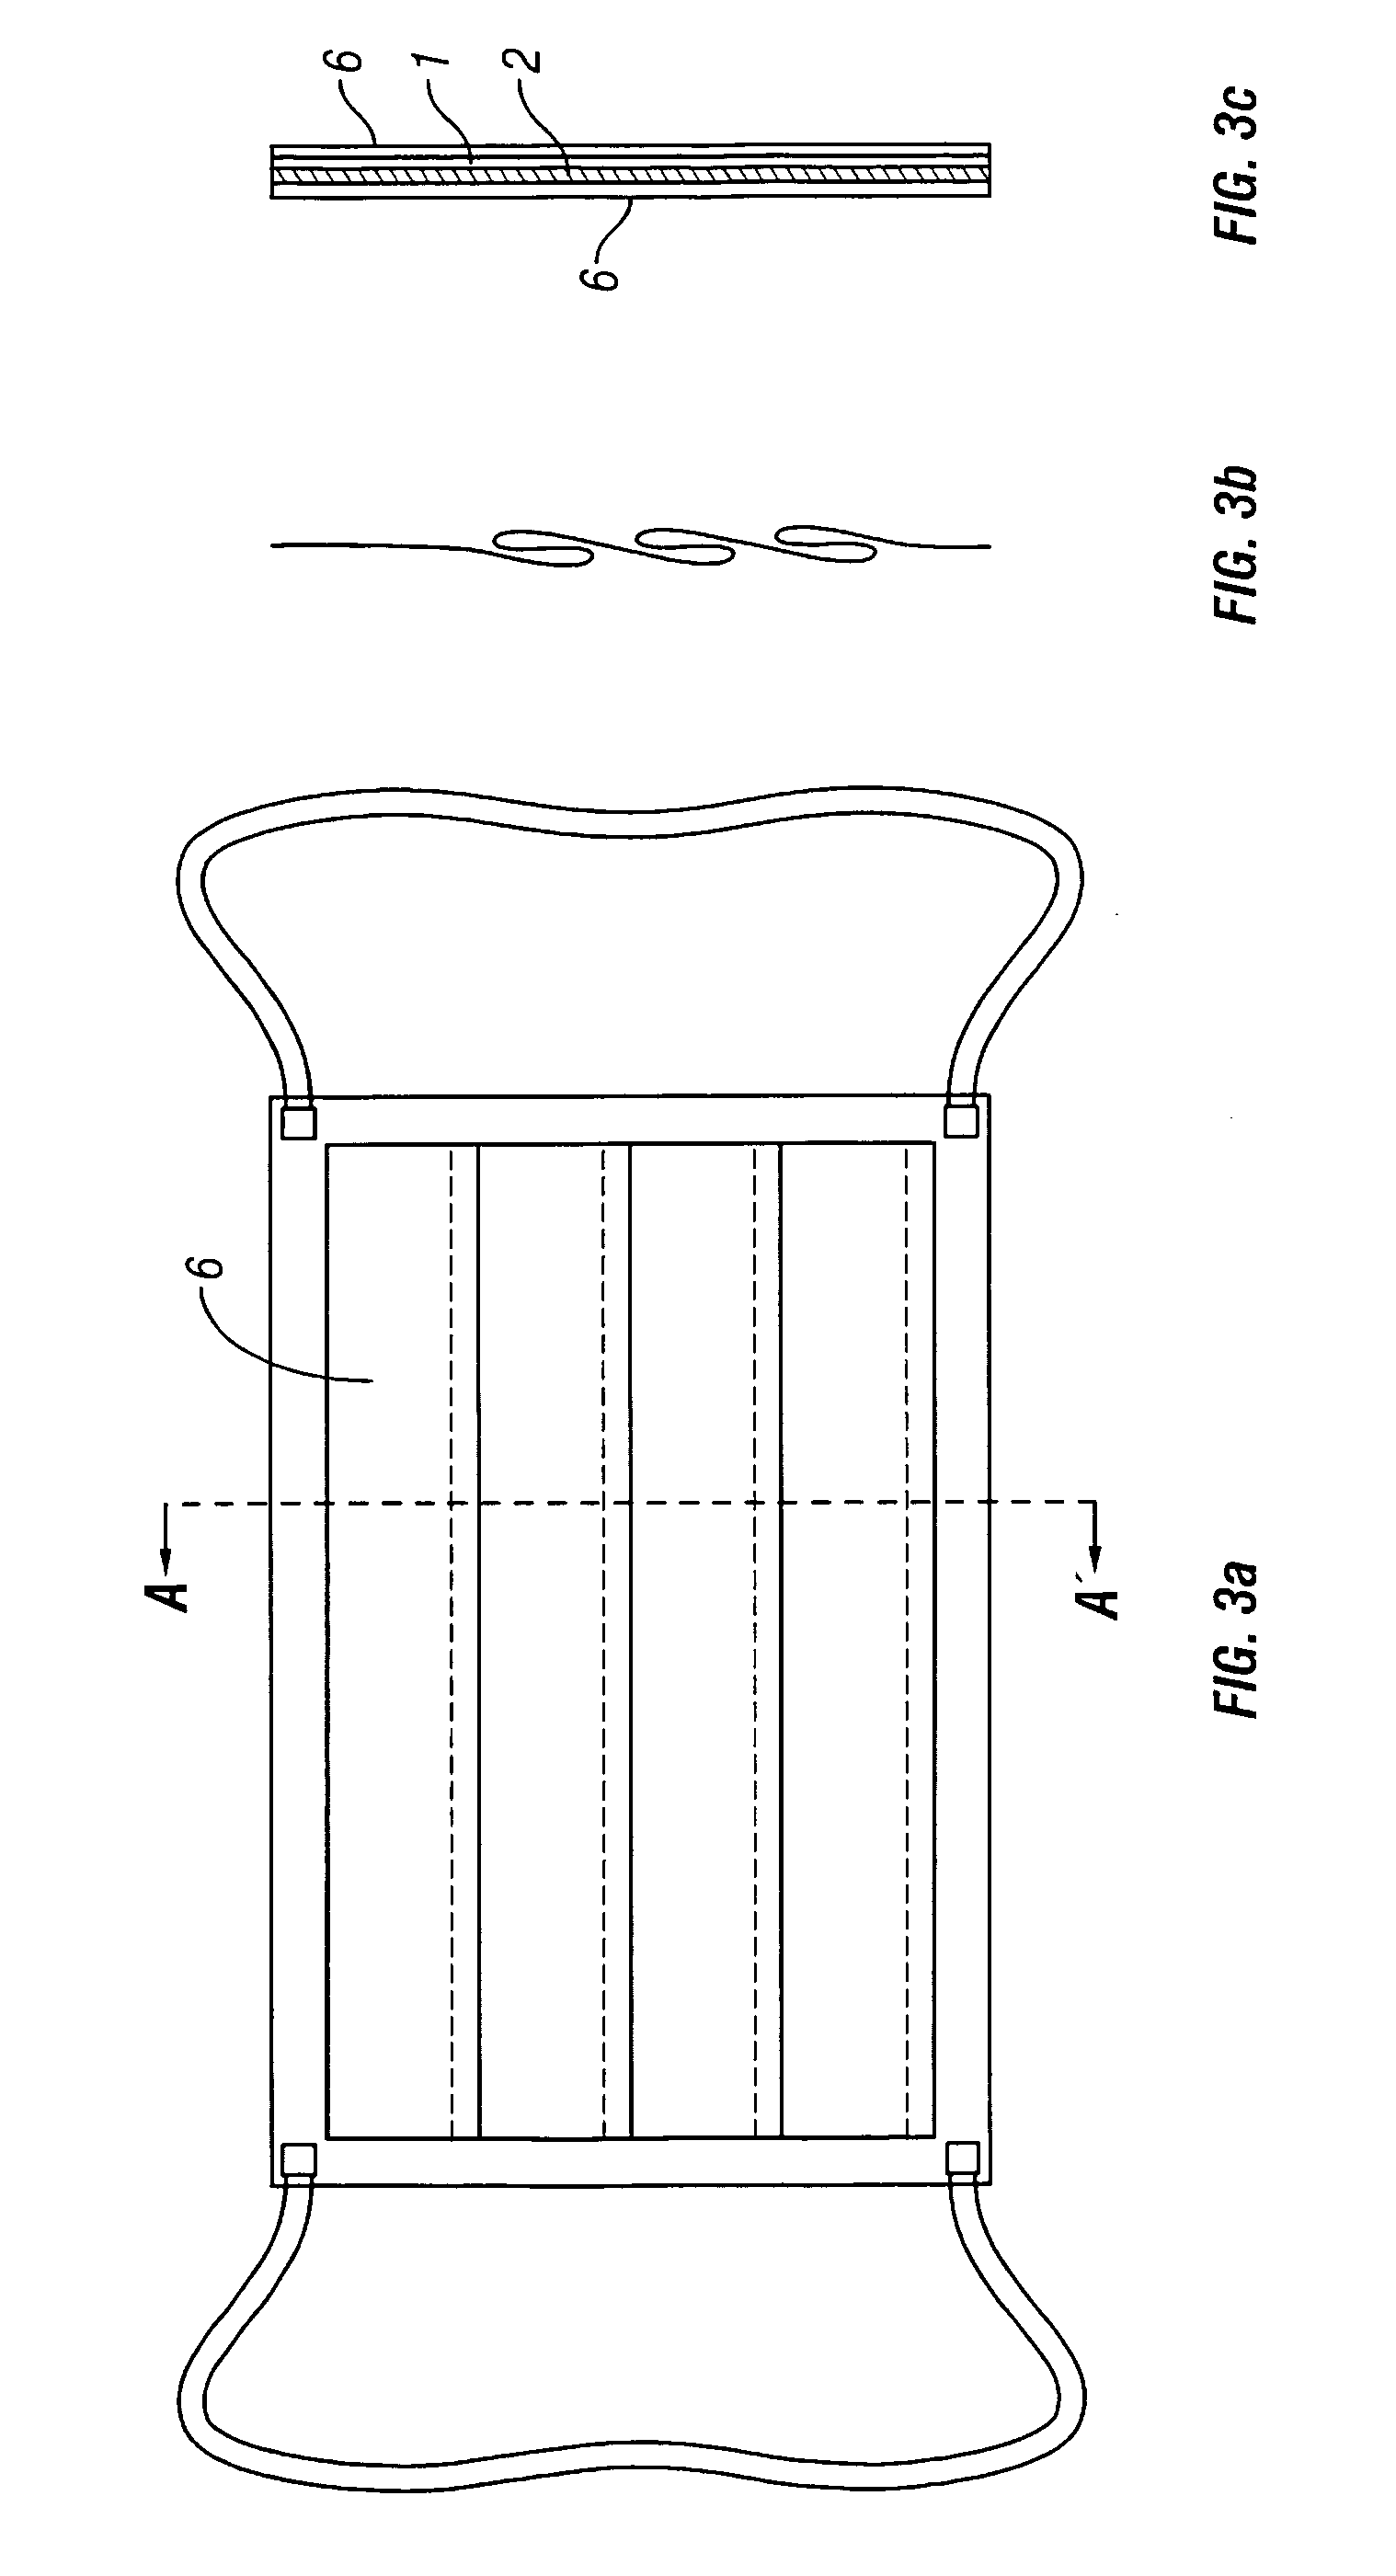 Bandage material with active carbon fibers